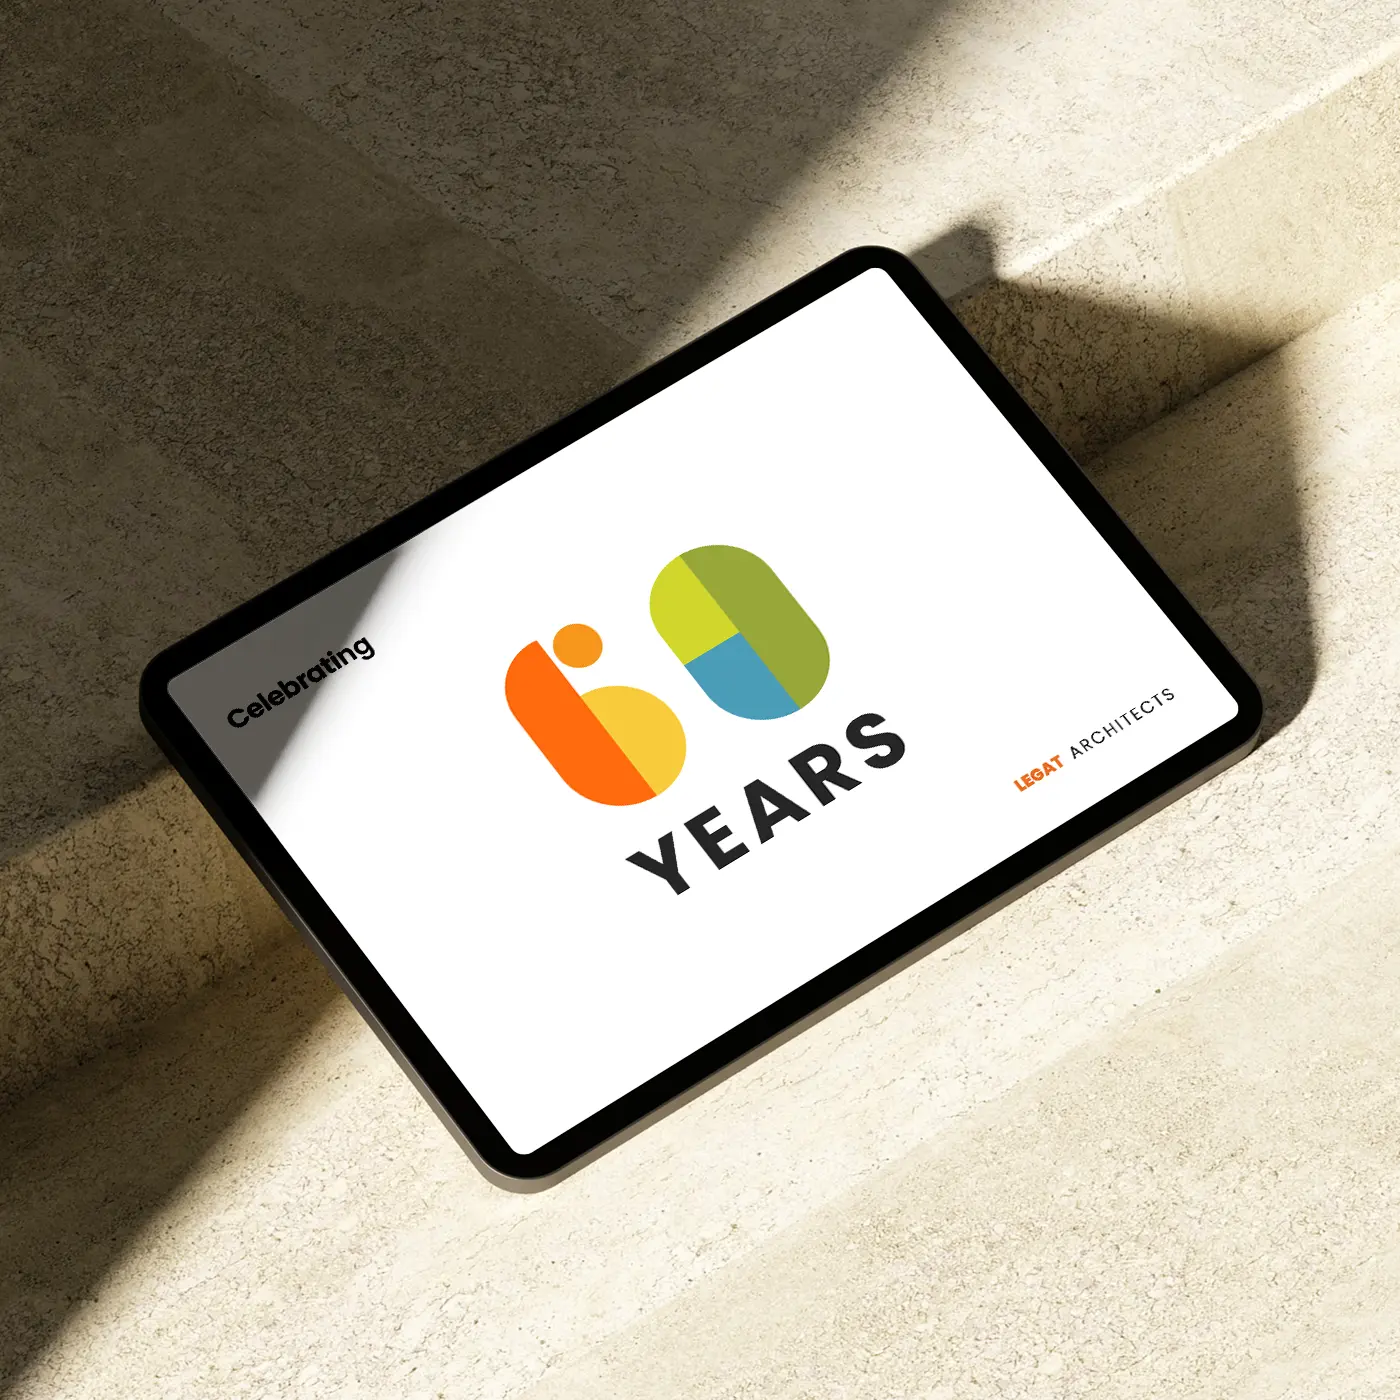 Anniversary logo design for an architects firm celebrating 60 years displayed on an iPad device.